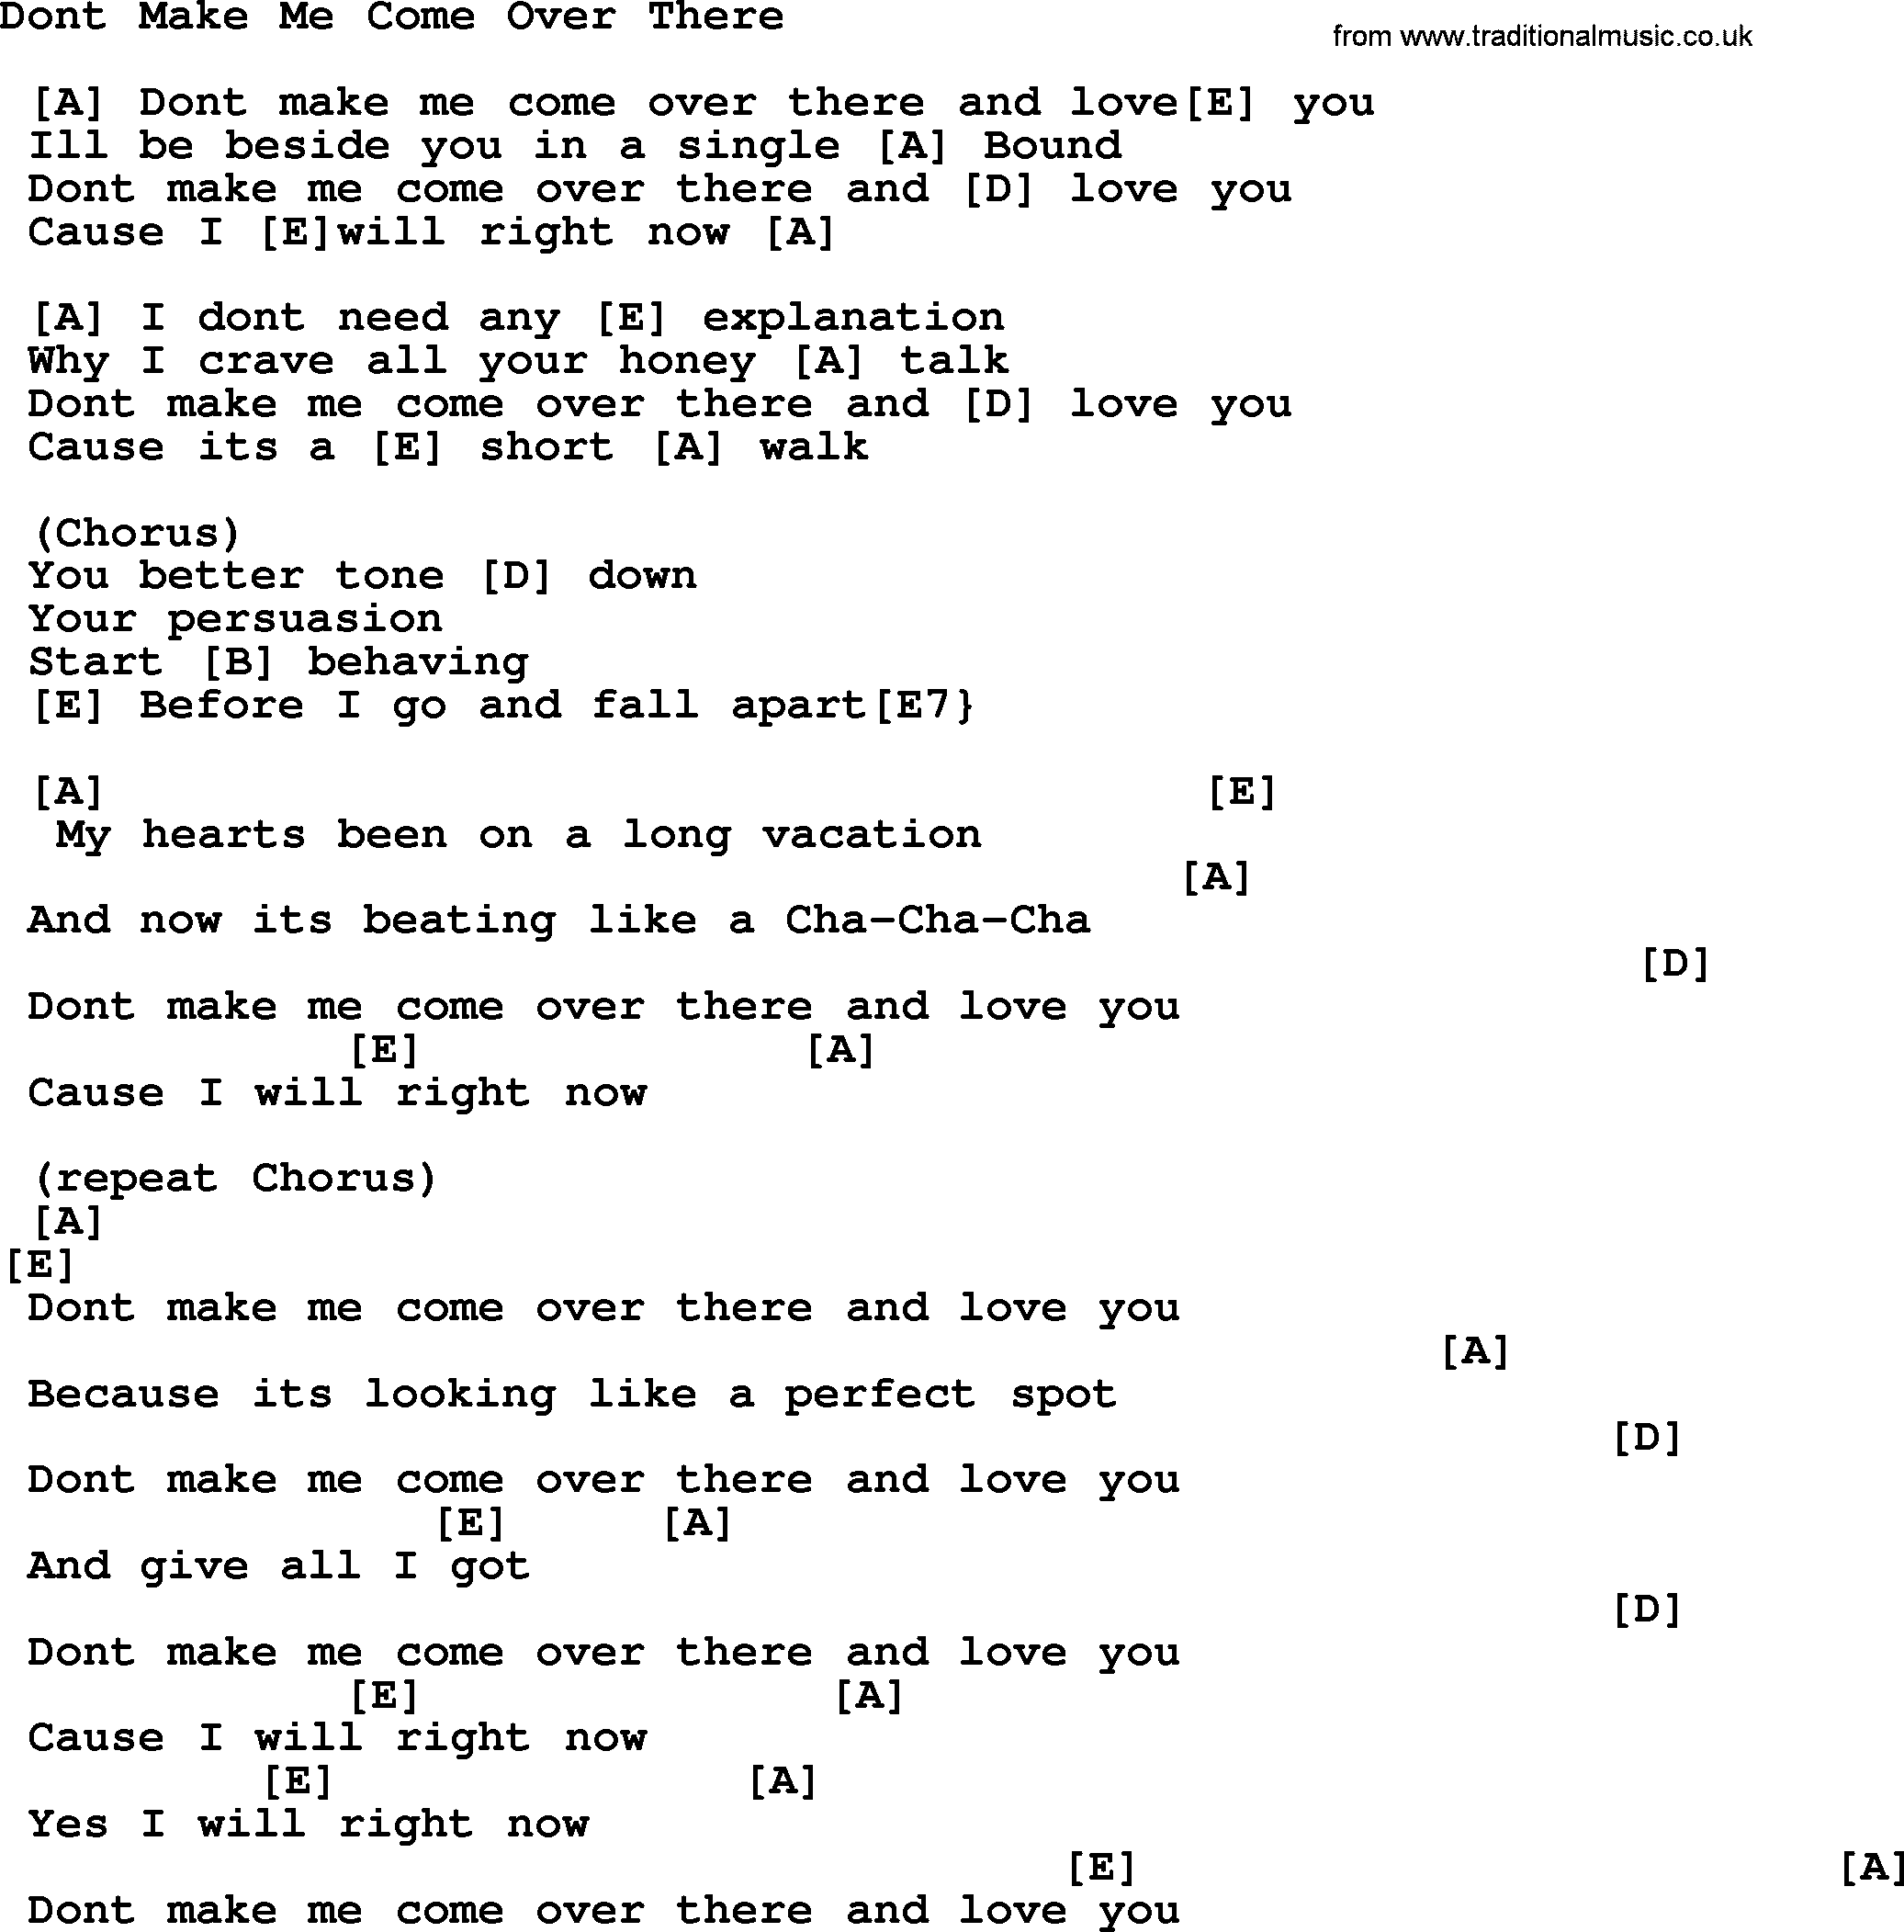 George Strait song: Dont Make Me Come Over There, lyrics and chords